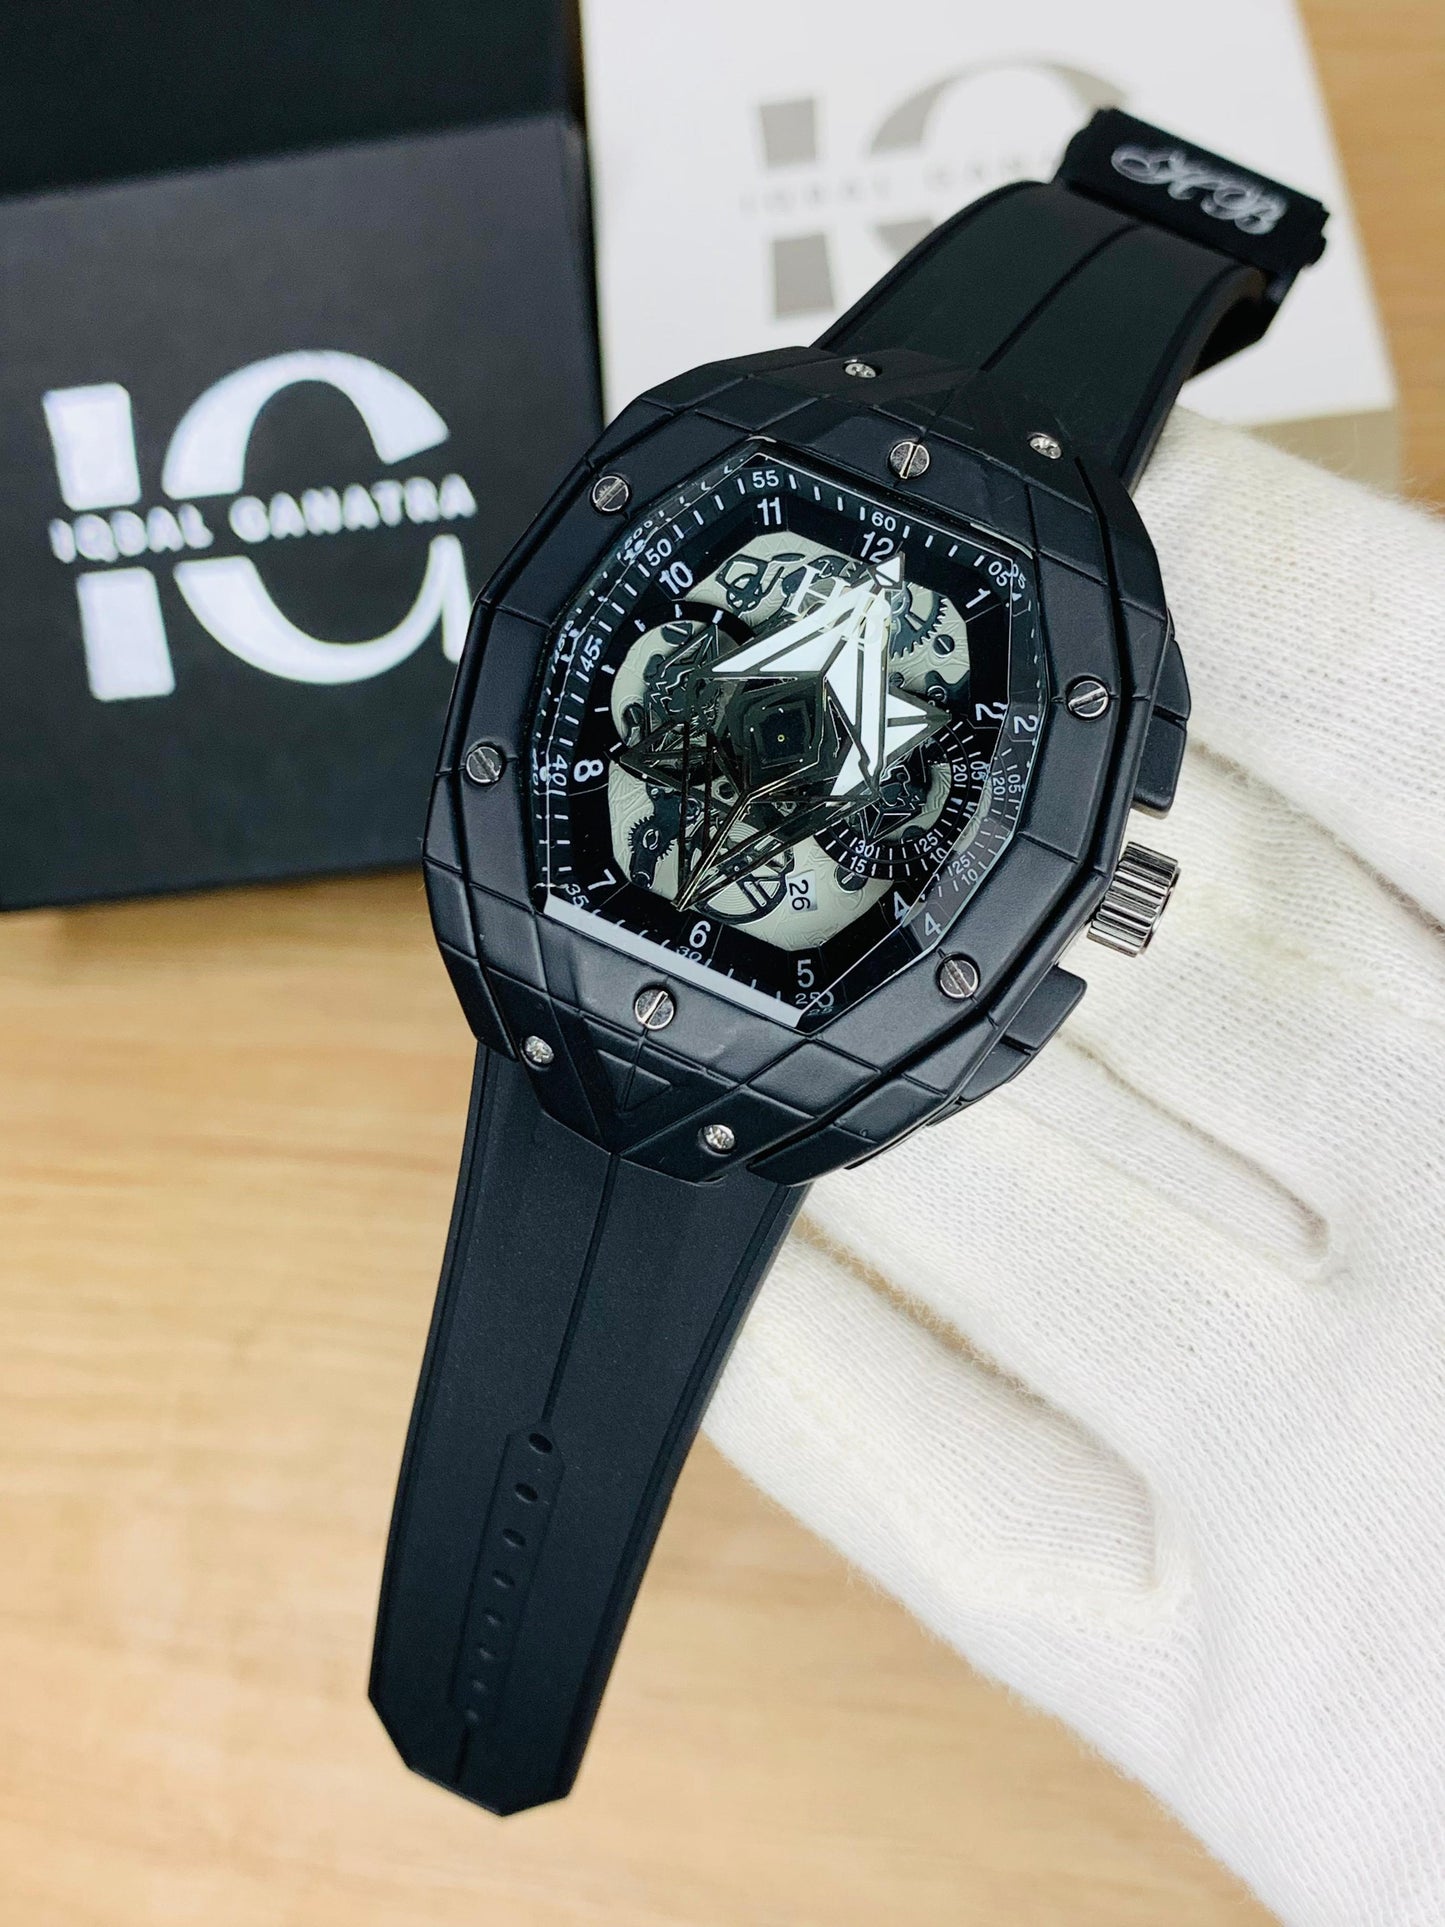 HB Limited Edition (Full Black)